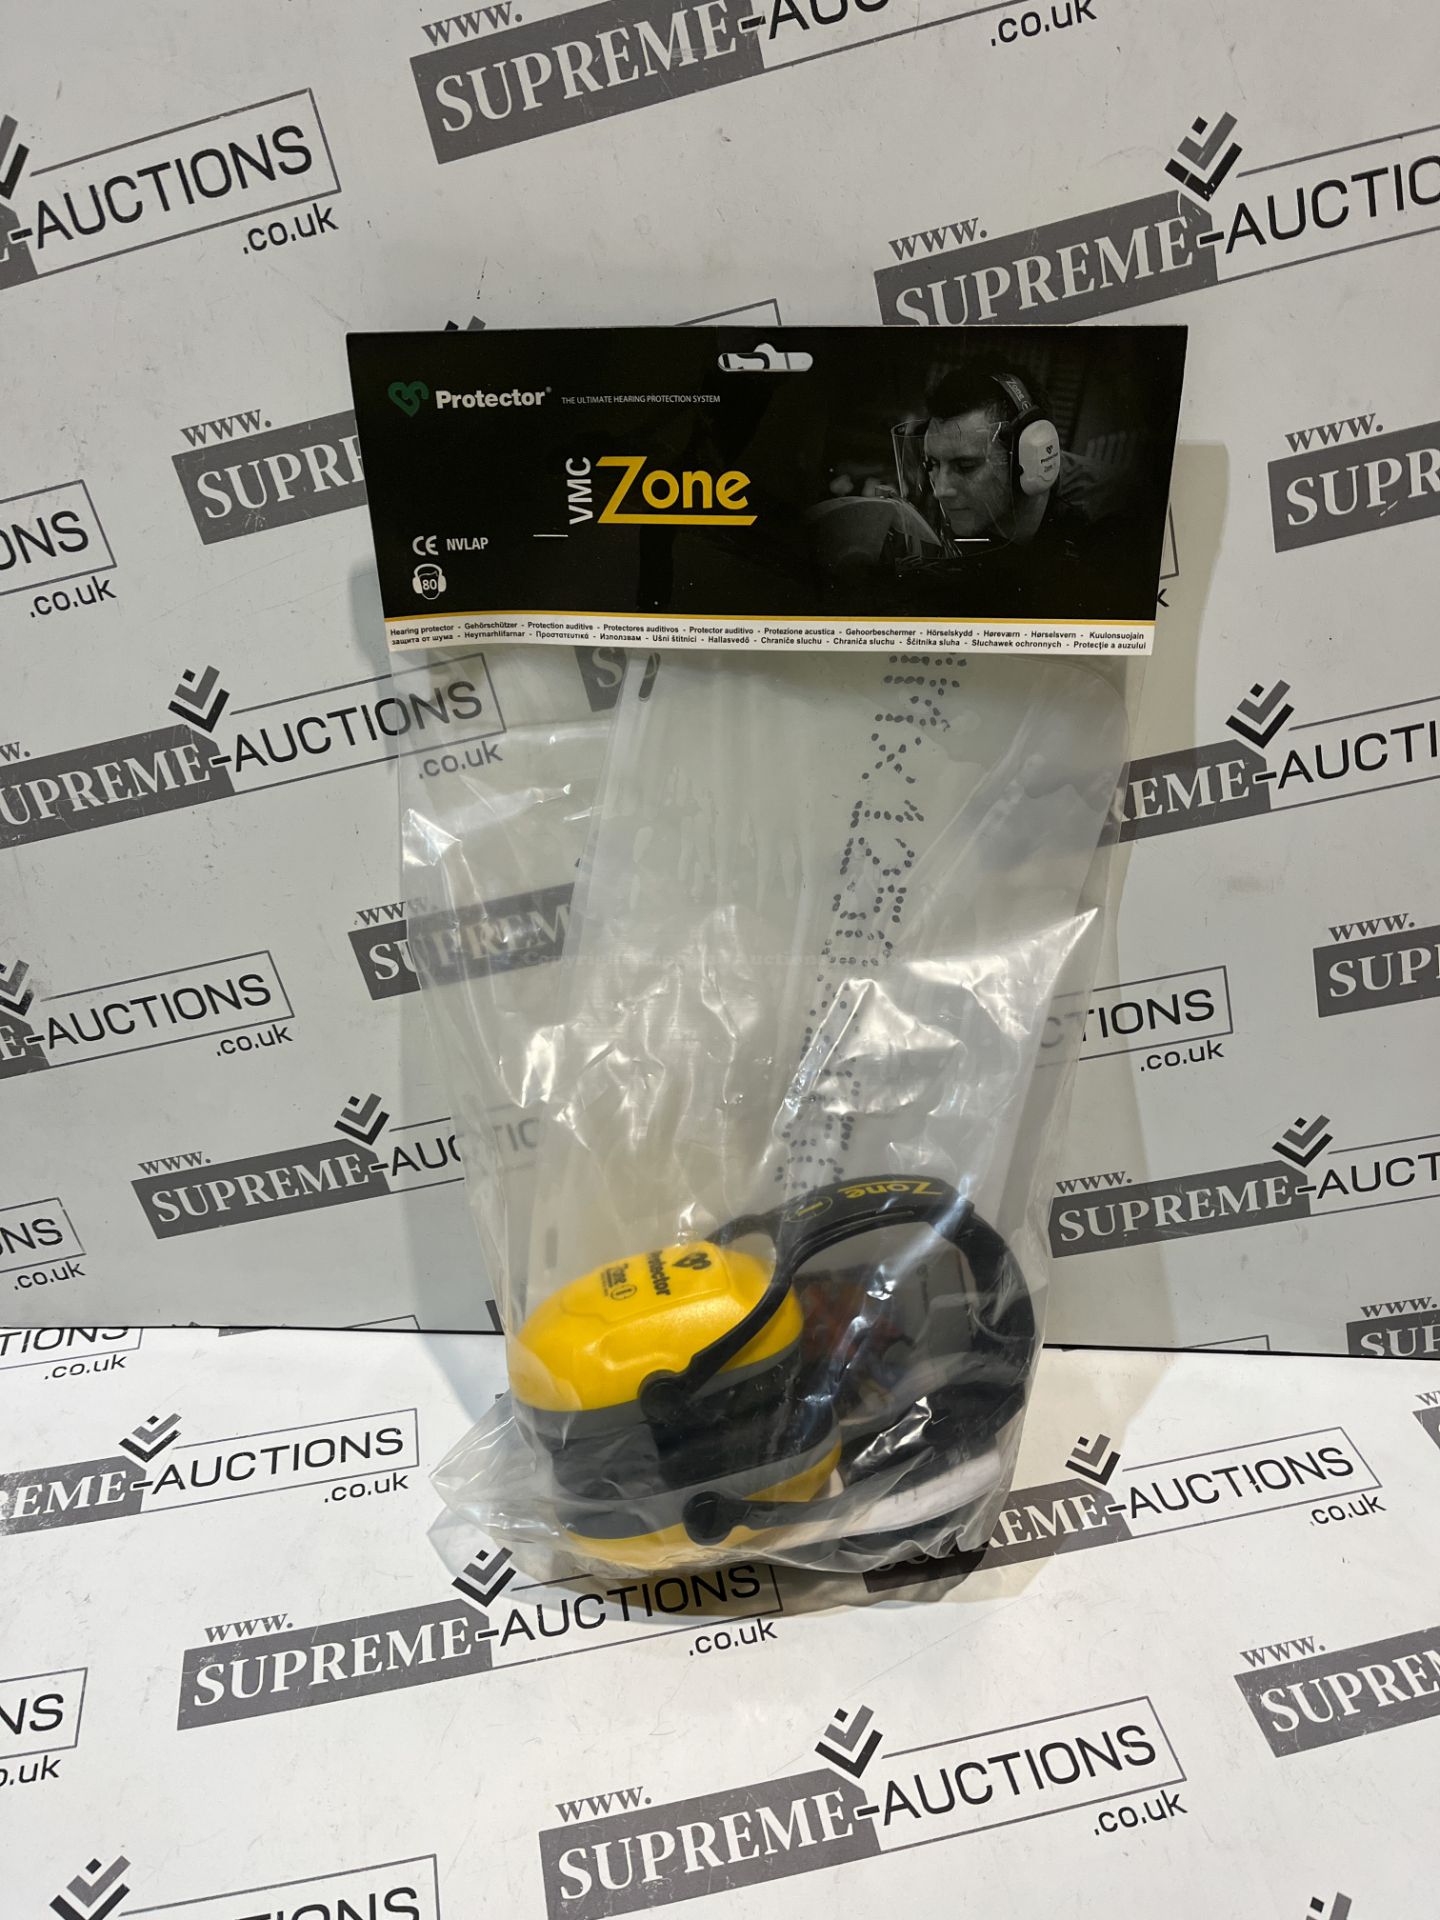 15 X BRAND NEW PAIRS OF PROTECTOR ZONE EAR DEFENDERS R9-17